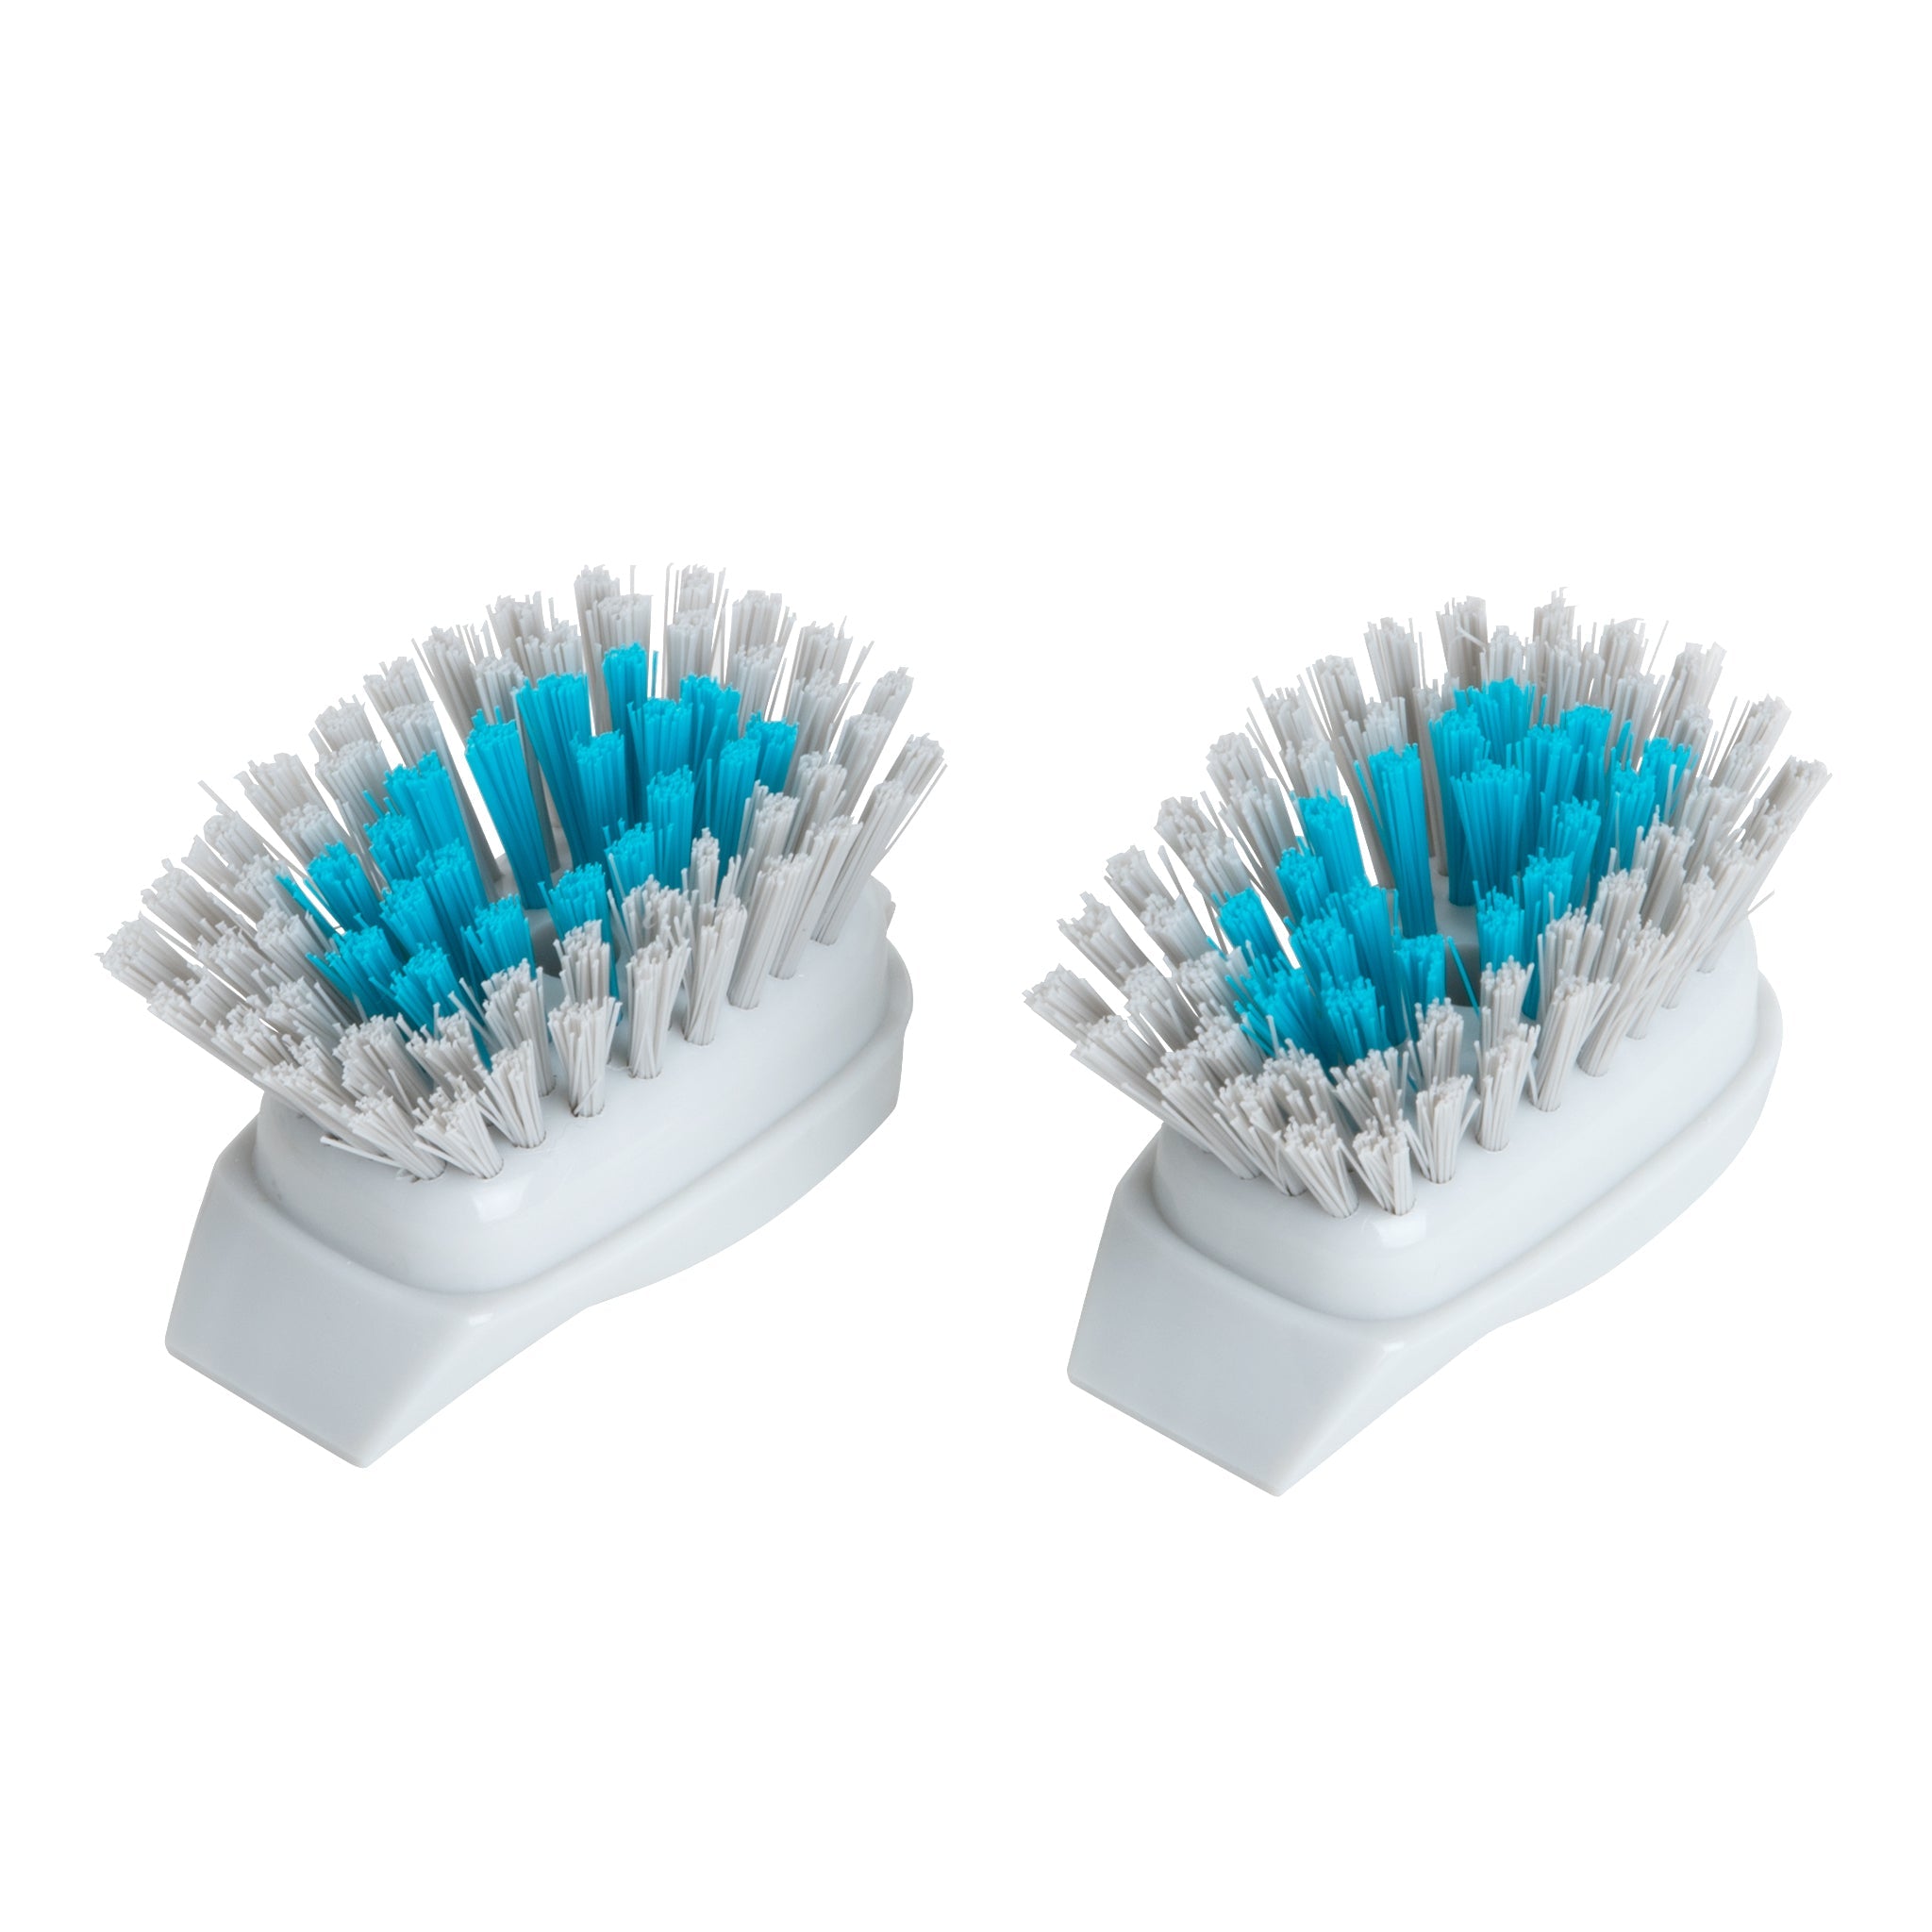 Replacement Brush Head with Built-In Scraper for Soap Dispensing Dish Wand - Smart Design® 1